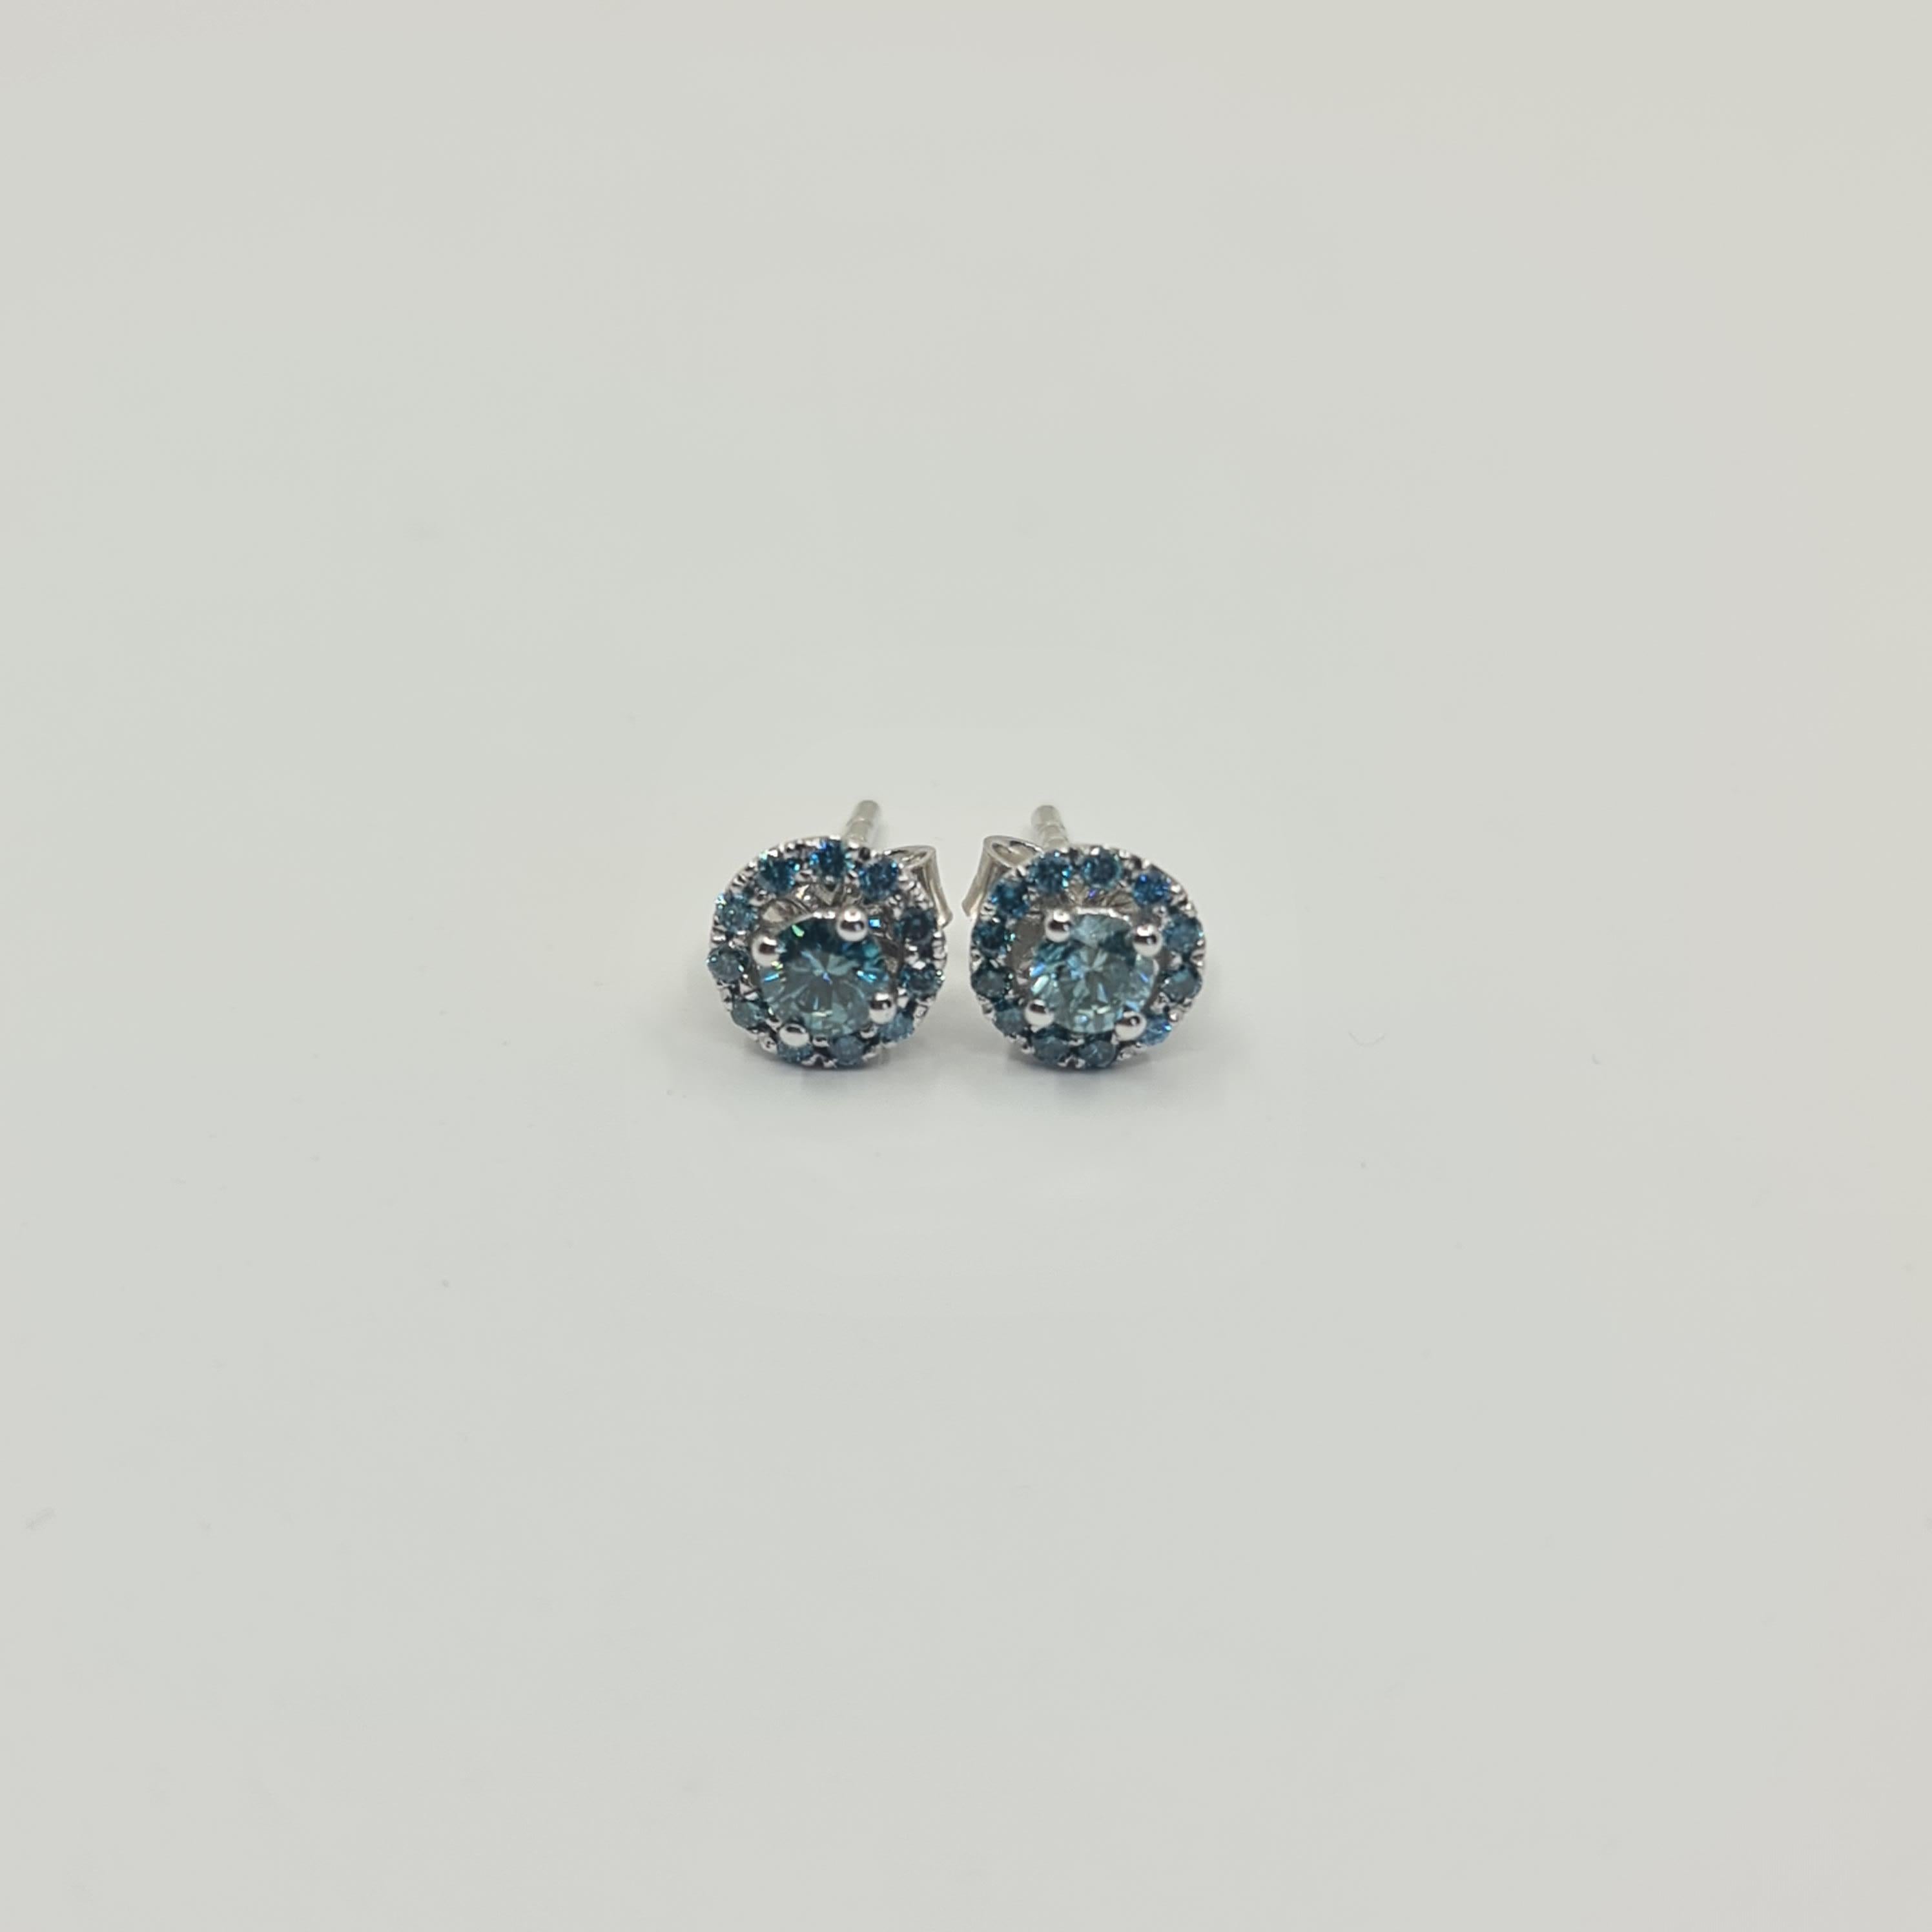 Modern Exquisite GIA Certified Solitaire Diamond Studs 0.18/0.19 Carat Fancy Blue-Green For Sale